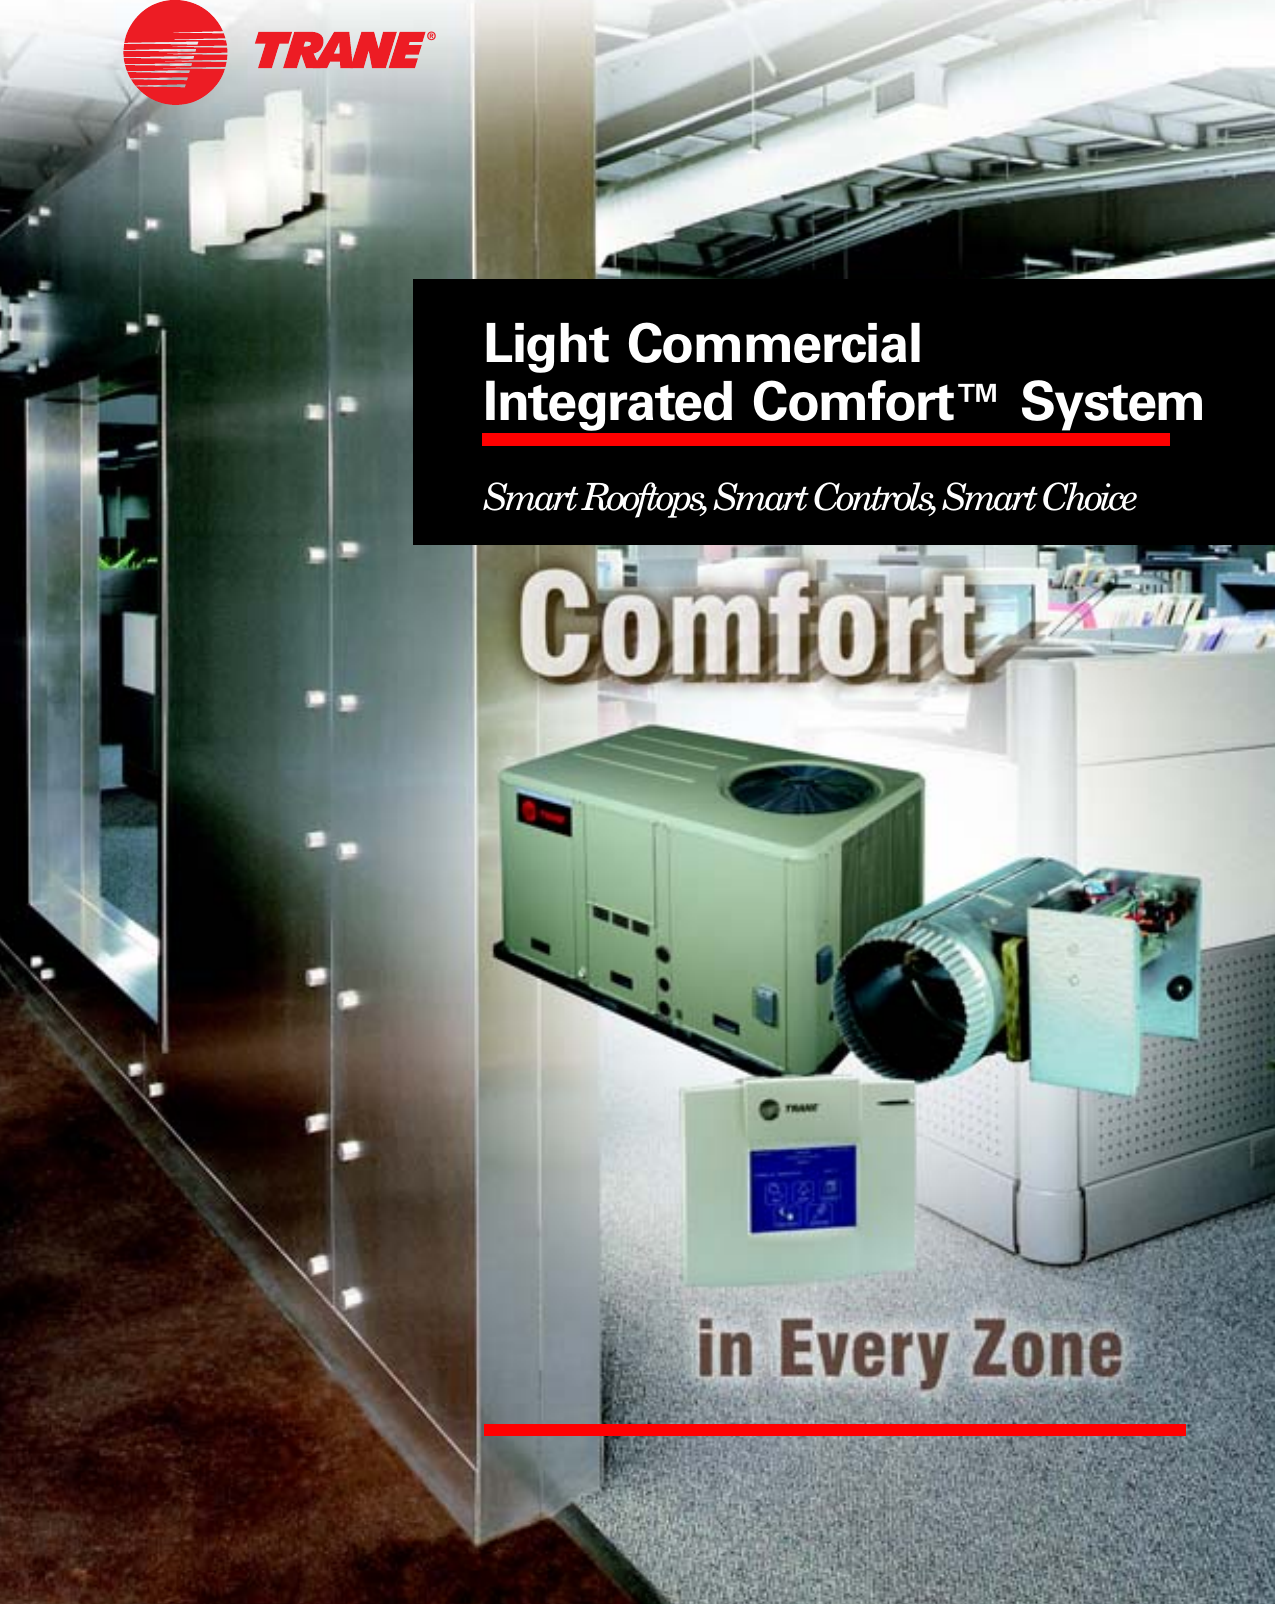 Page 1 of 6 - Trane Trane-Varitrac-Dampers-Brochure- UN-SLB002-EN 10/01/2004 Light Commercial Integrated Comfort System  Smart Rooftops , Controls Choice Trane-varitrac-dampers-brochure